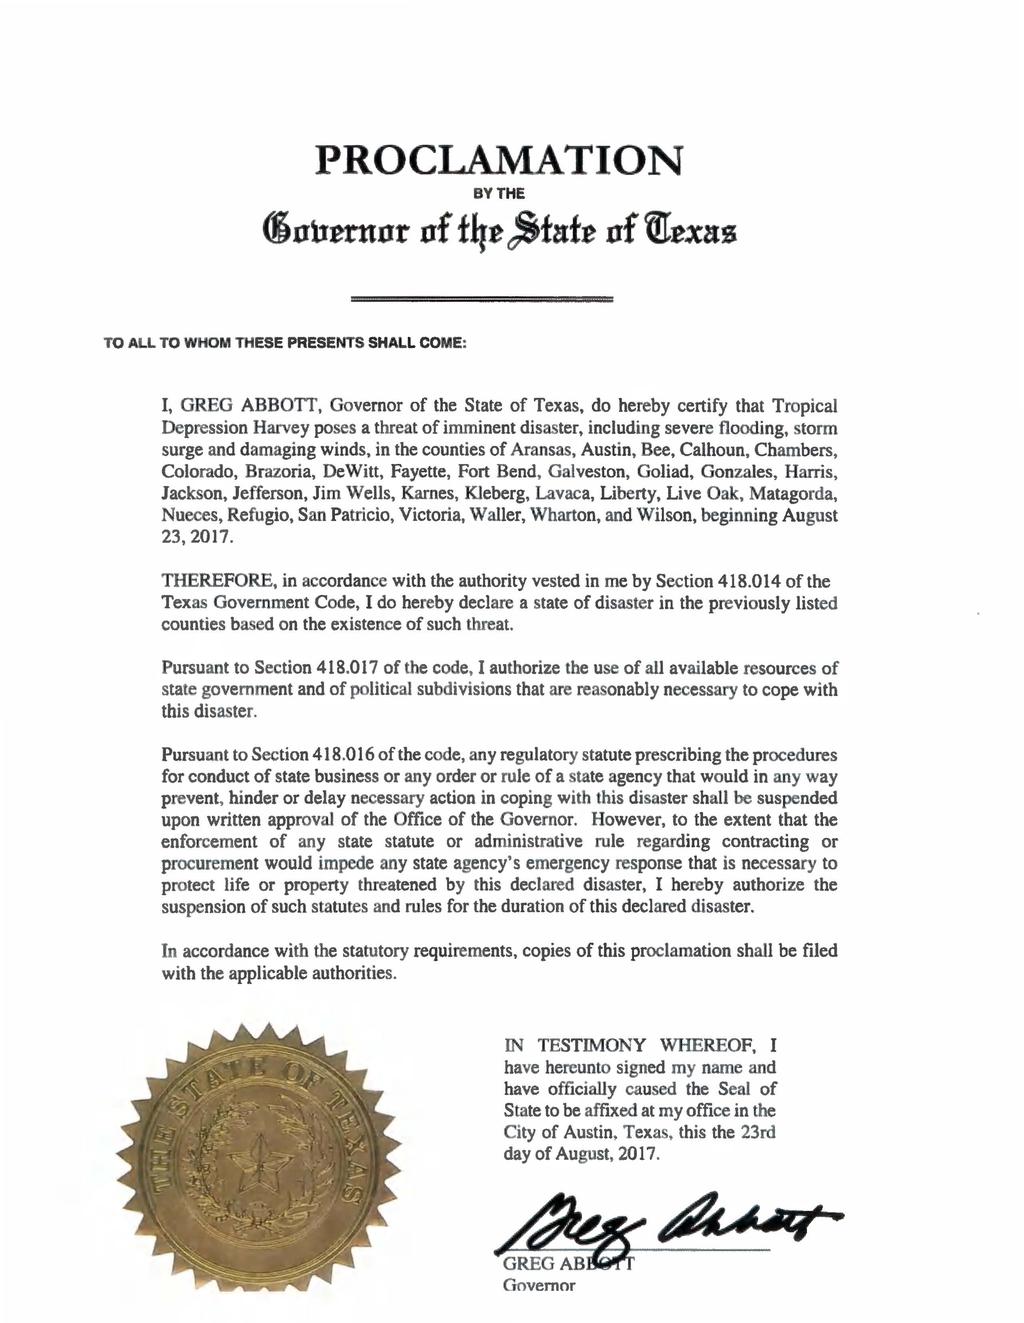 PROCLAMATION BY THE TO ALL TO WHOM THESE PRESENTS SHALL COME: I, GREG ABBOTT, Governor of the State of Texas.